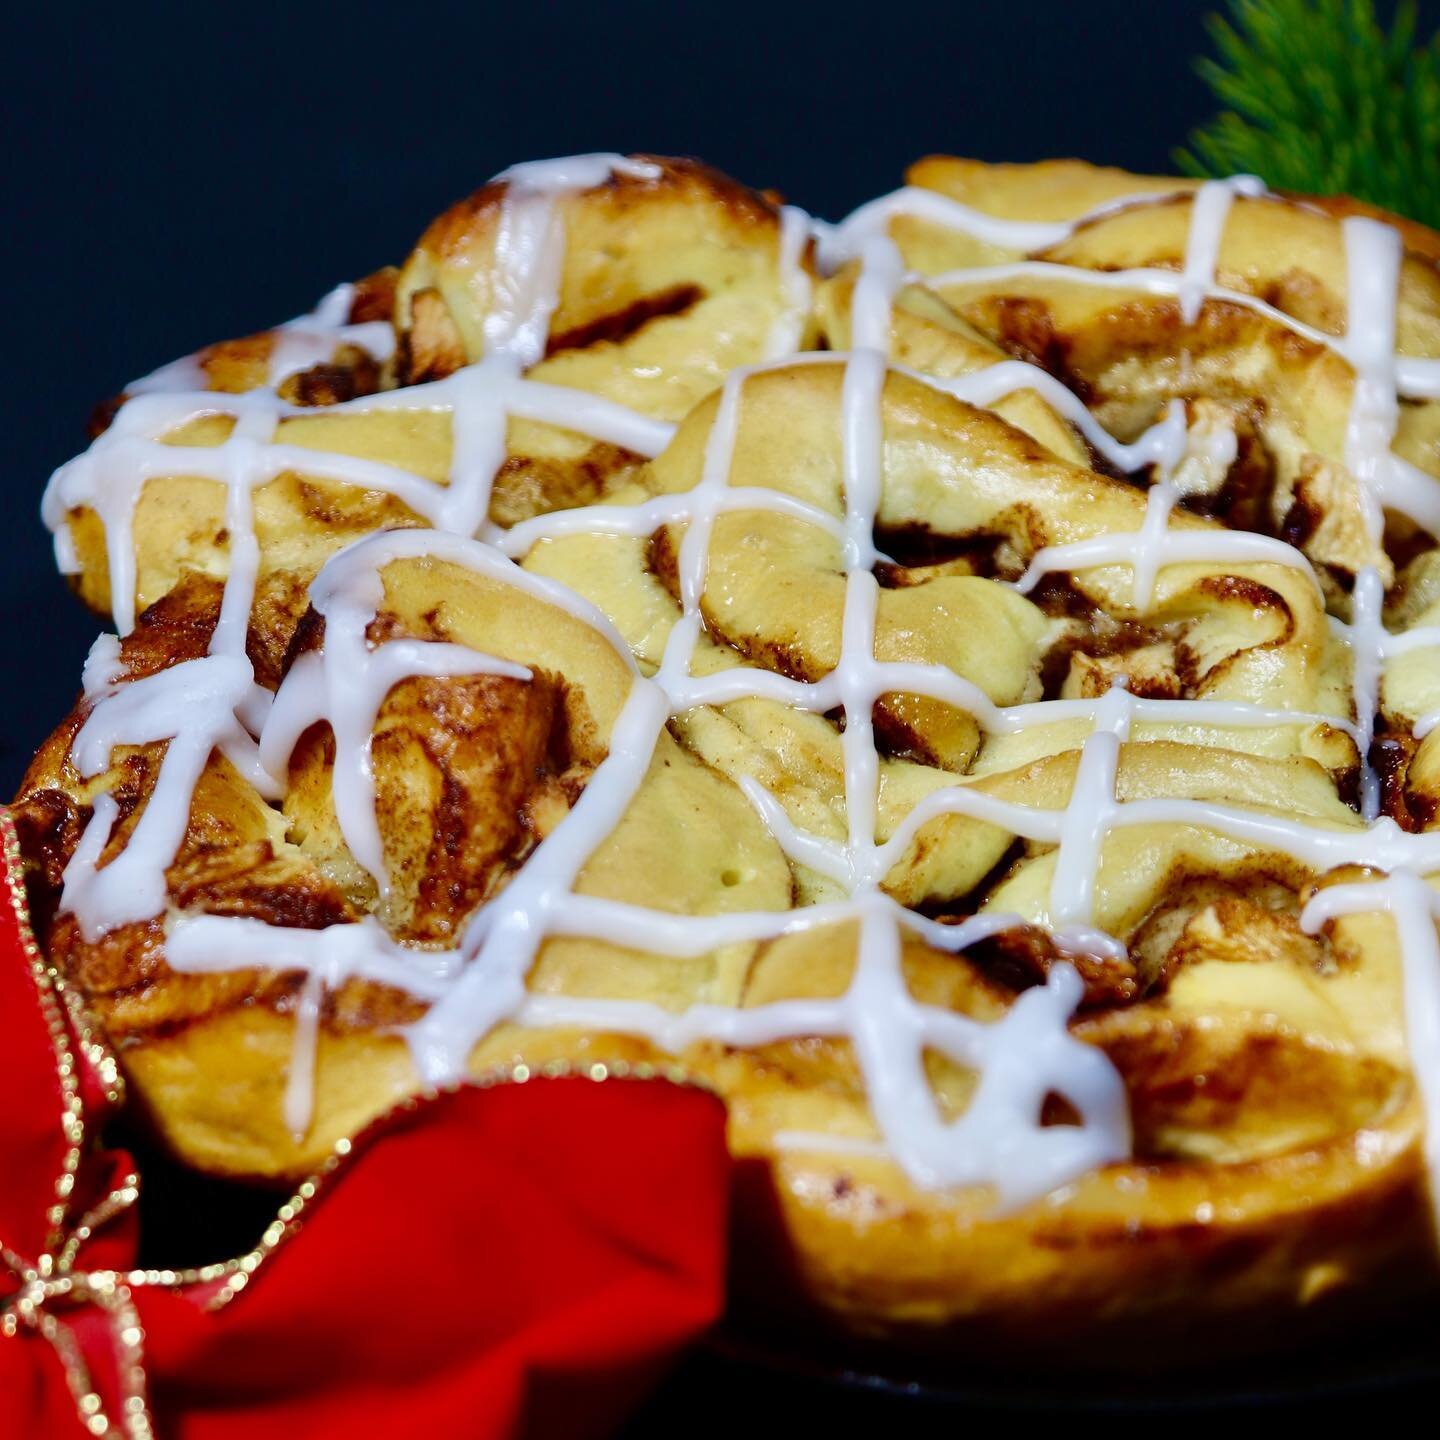 Tis the season... 😊🎄 Come try out our Apple Chelsea buns - layered with cinnamon sugar, filled fresh apple cuts, slathered with our own honey glazed 🍎🍯 Contact us via Phone or order via our website ❤️👨🏽&zwj;🍳